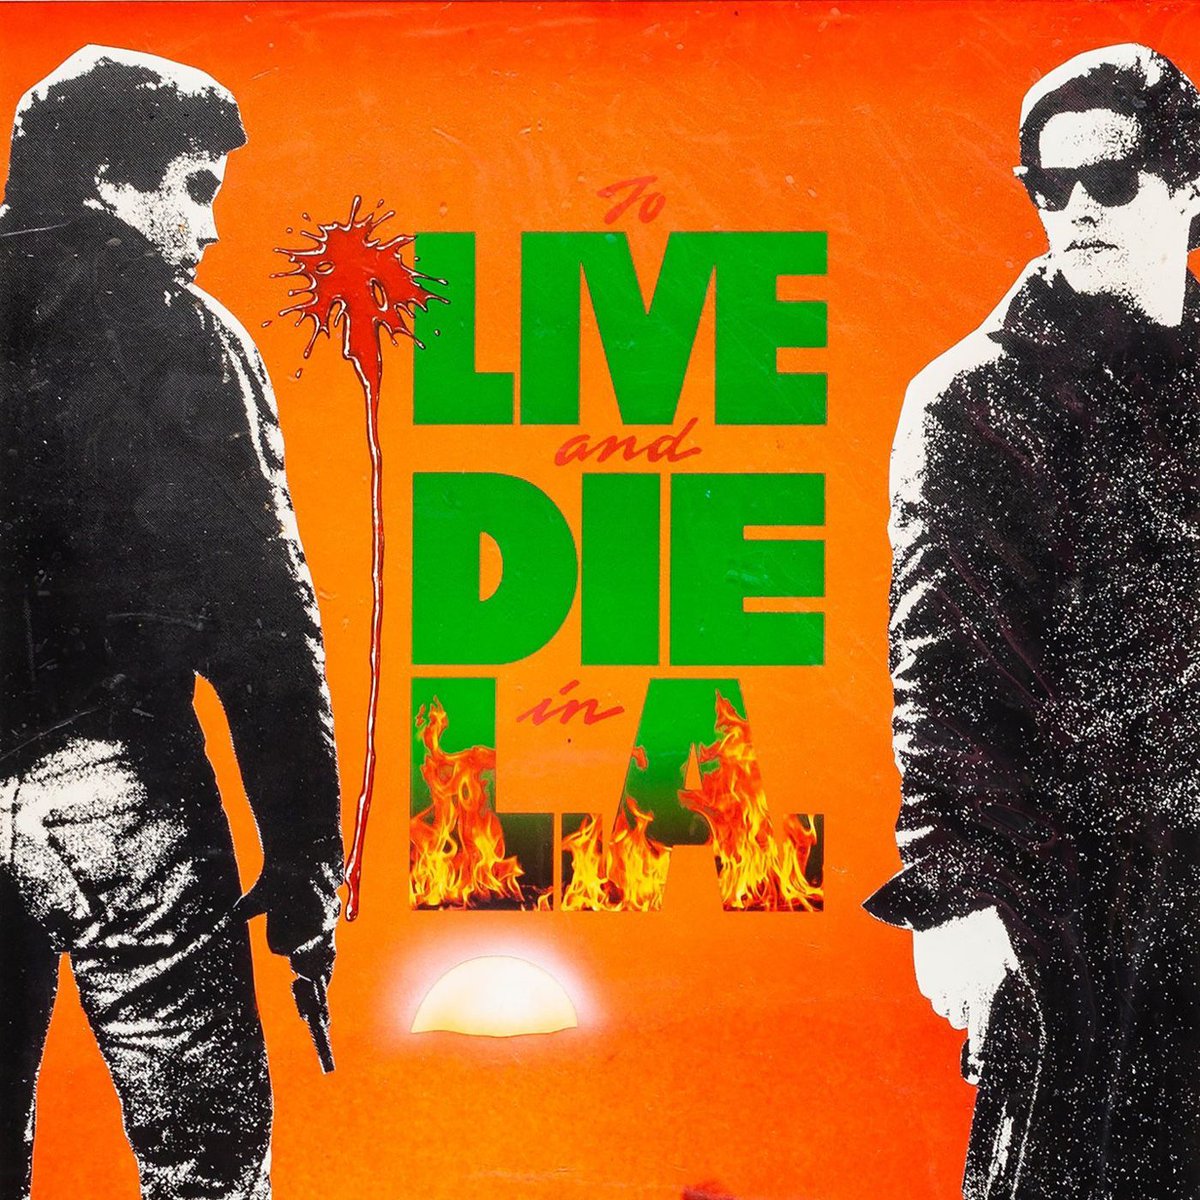 TO LIVE AND DIE IN L.A. (1985) screens January 23rd -25th on a 35mm double bill with DRIVE (2011). Low ticket alert: buff.ly/3xXcQDx